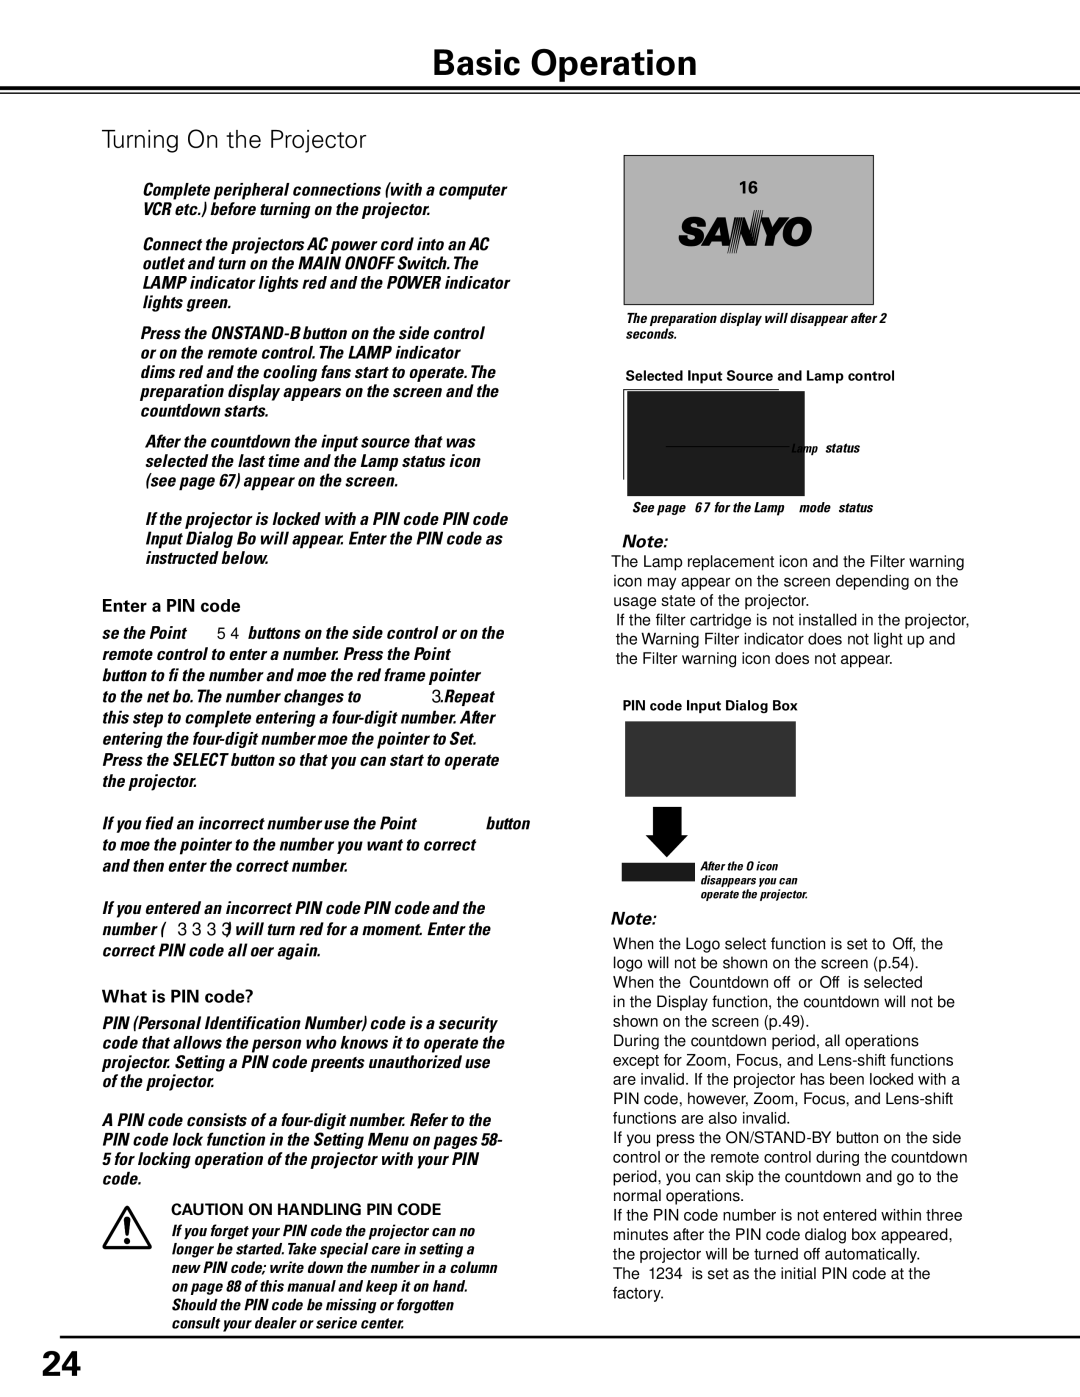 Sanyo PDG-DHT8000L owner manual Basic Operation, Turning On the Projector, Enter a PIN code, What is PIN code? 